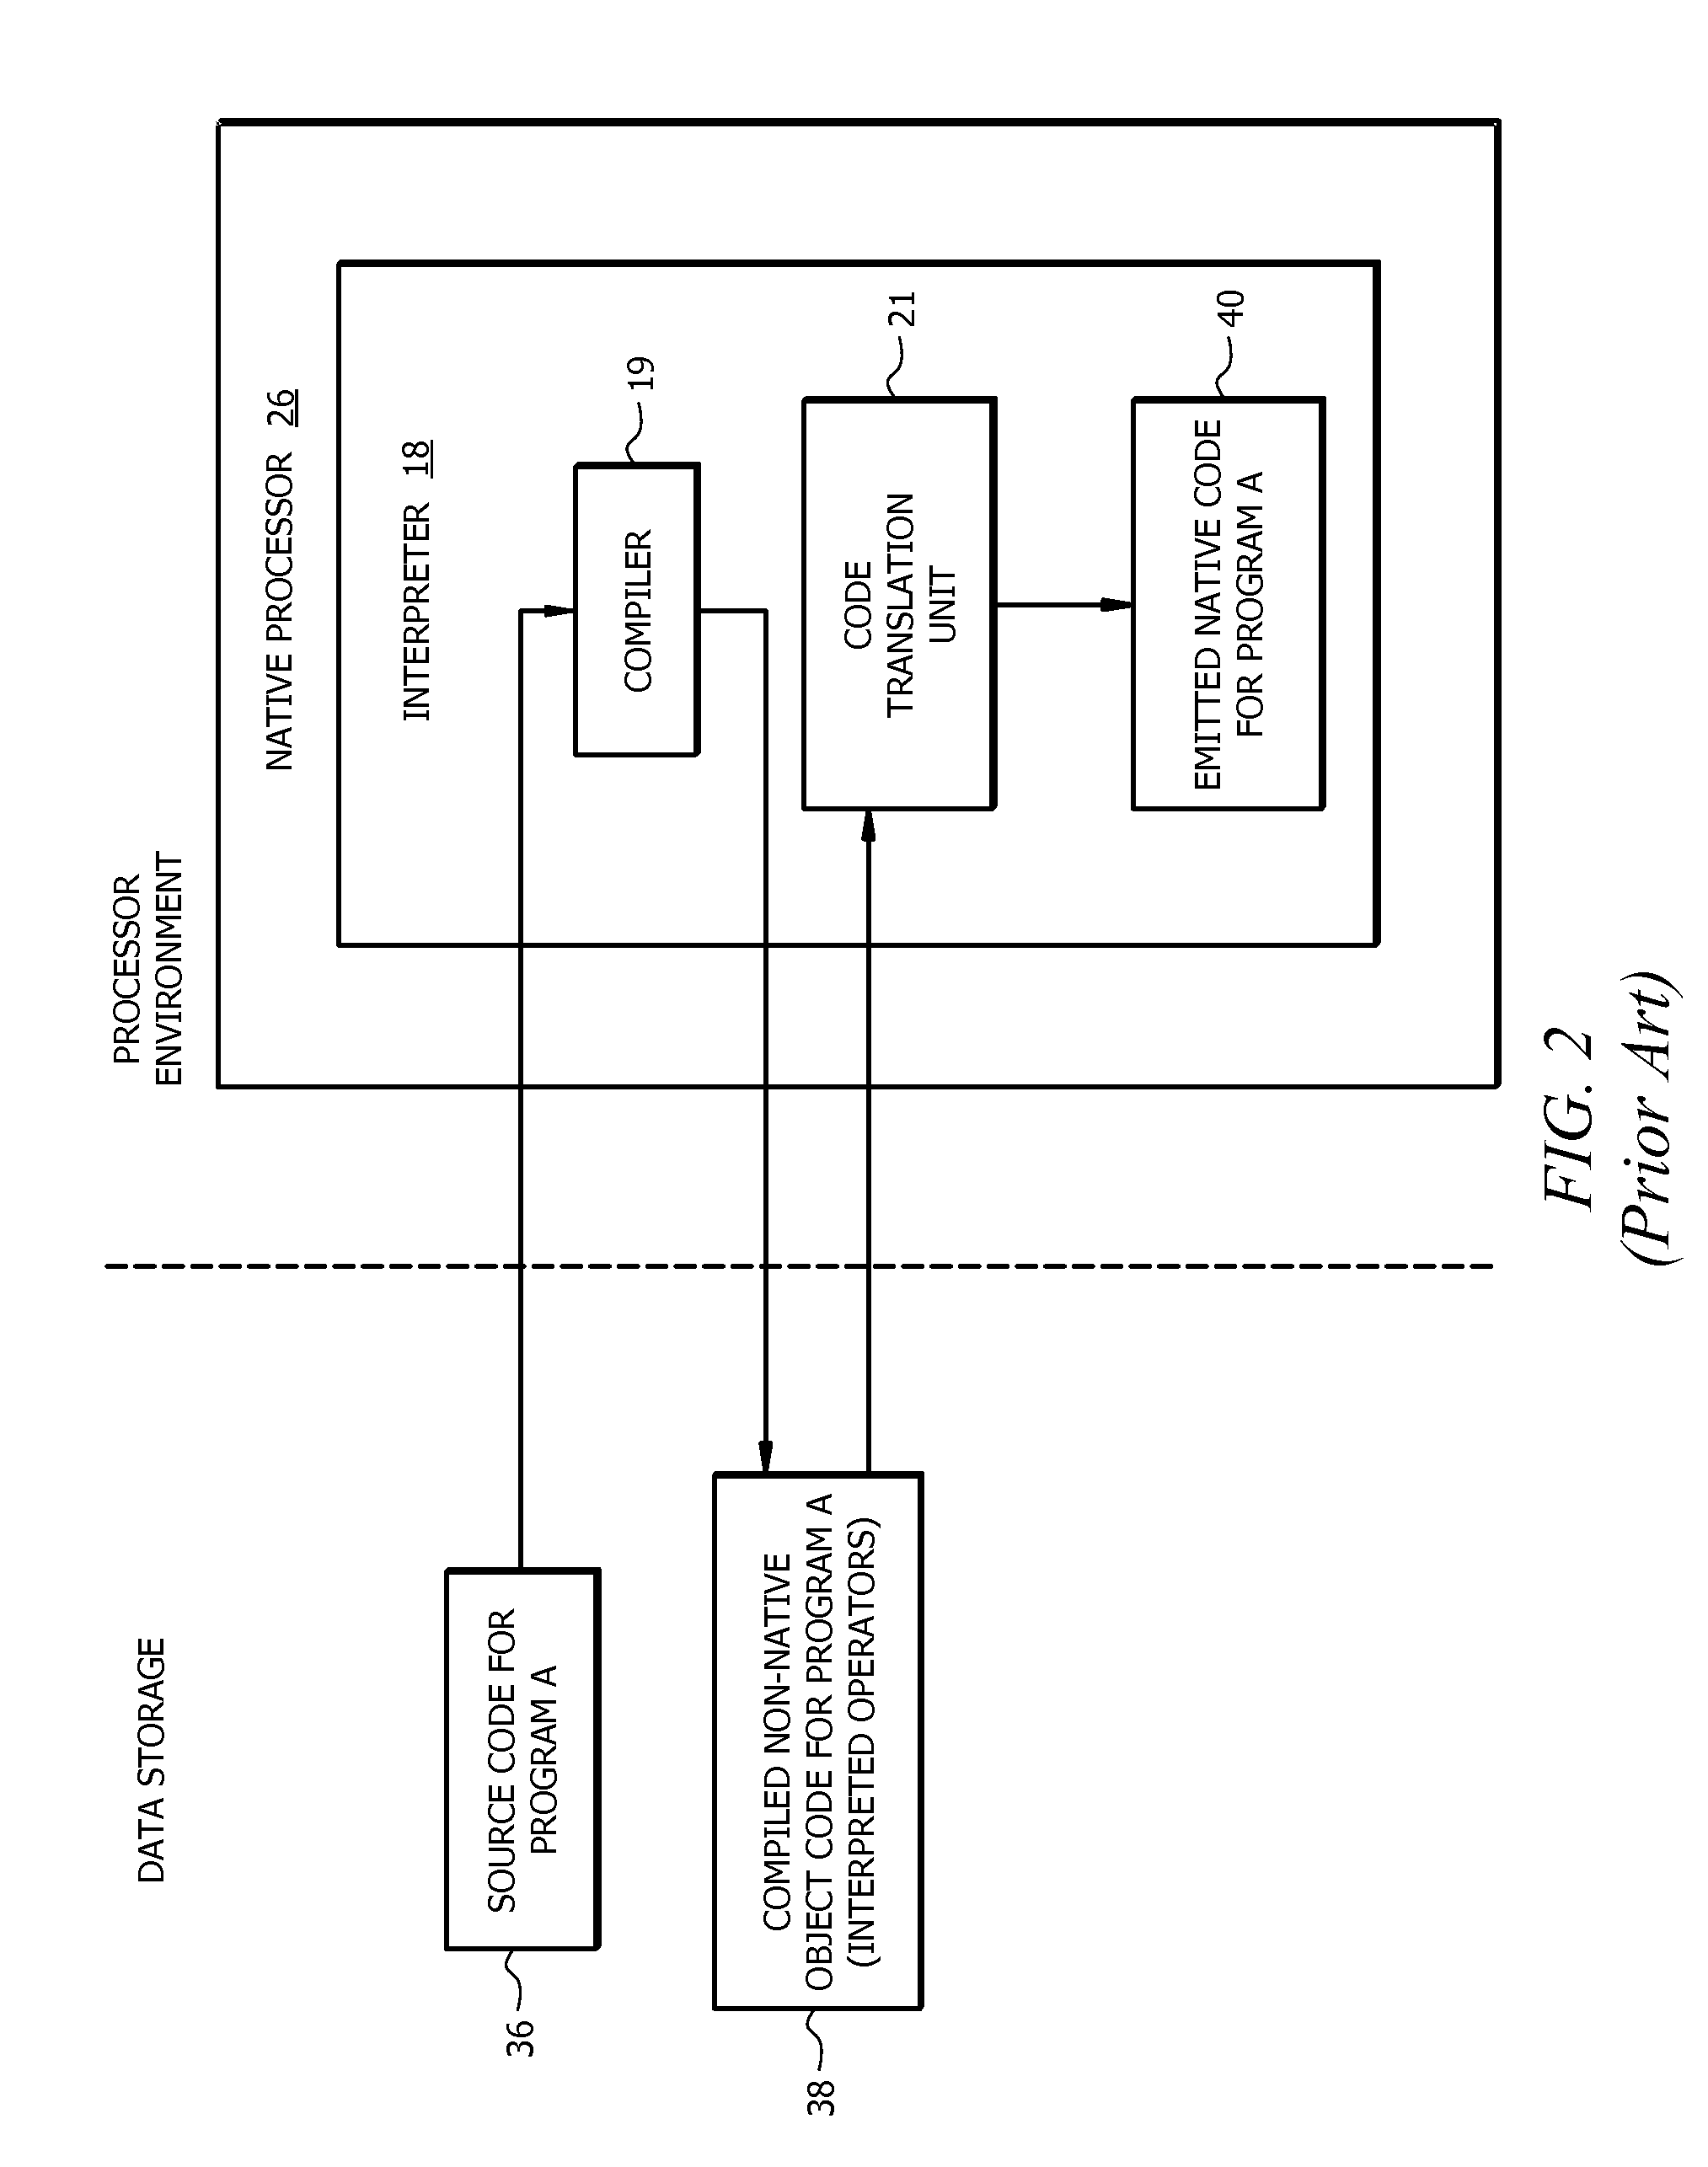 Multi-modal compiling apparatus and method for generating a hybrid codefile